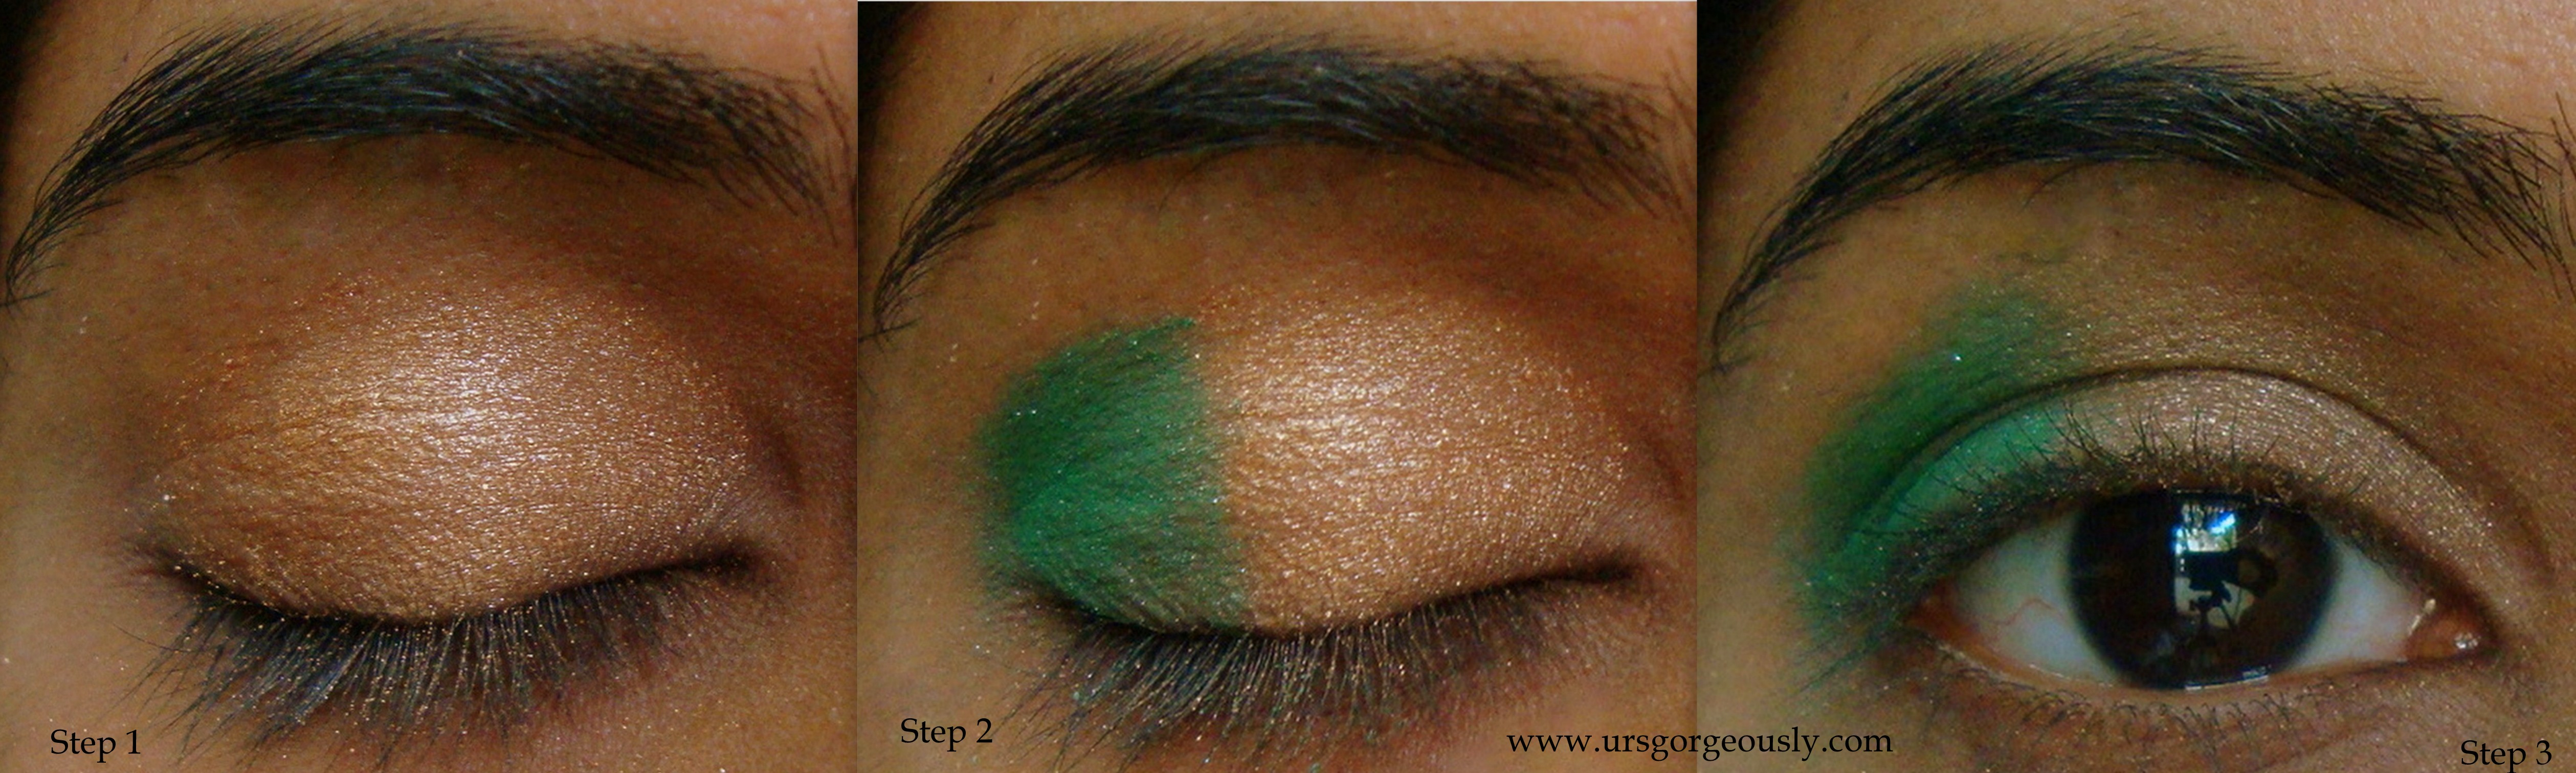 Green And Gold Eye Makeup 6 Simple Steps For A Gold And Green Eye Makeup Tutorial Ursgorgeously